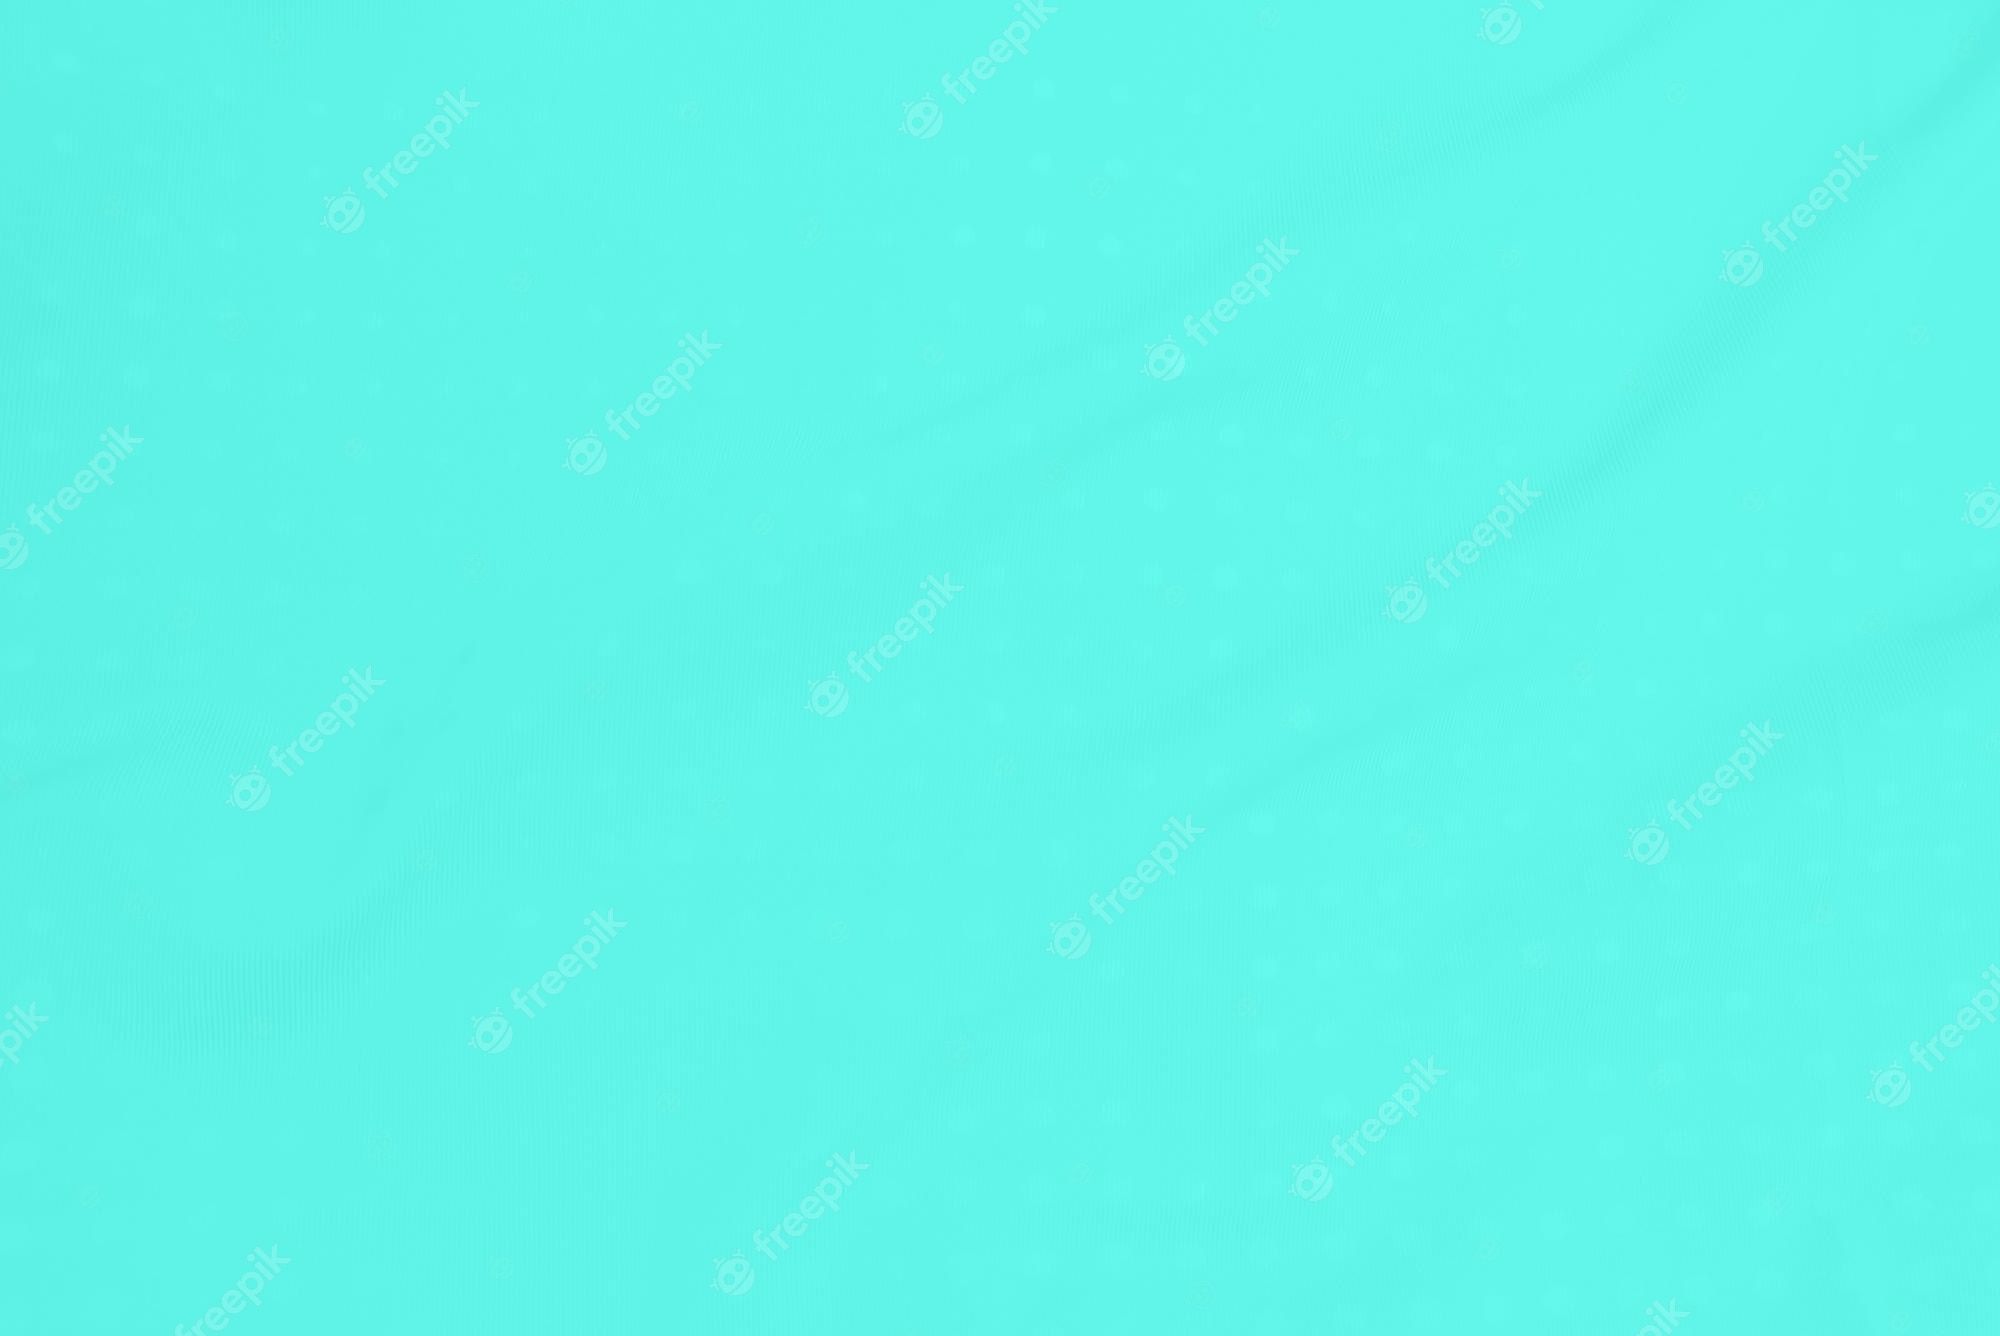 A bright blue background - Turquoise